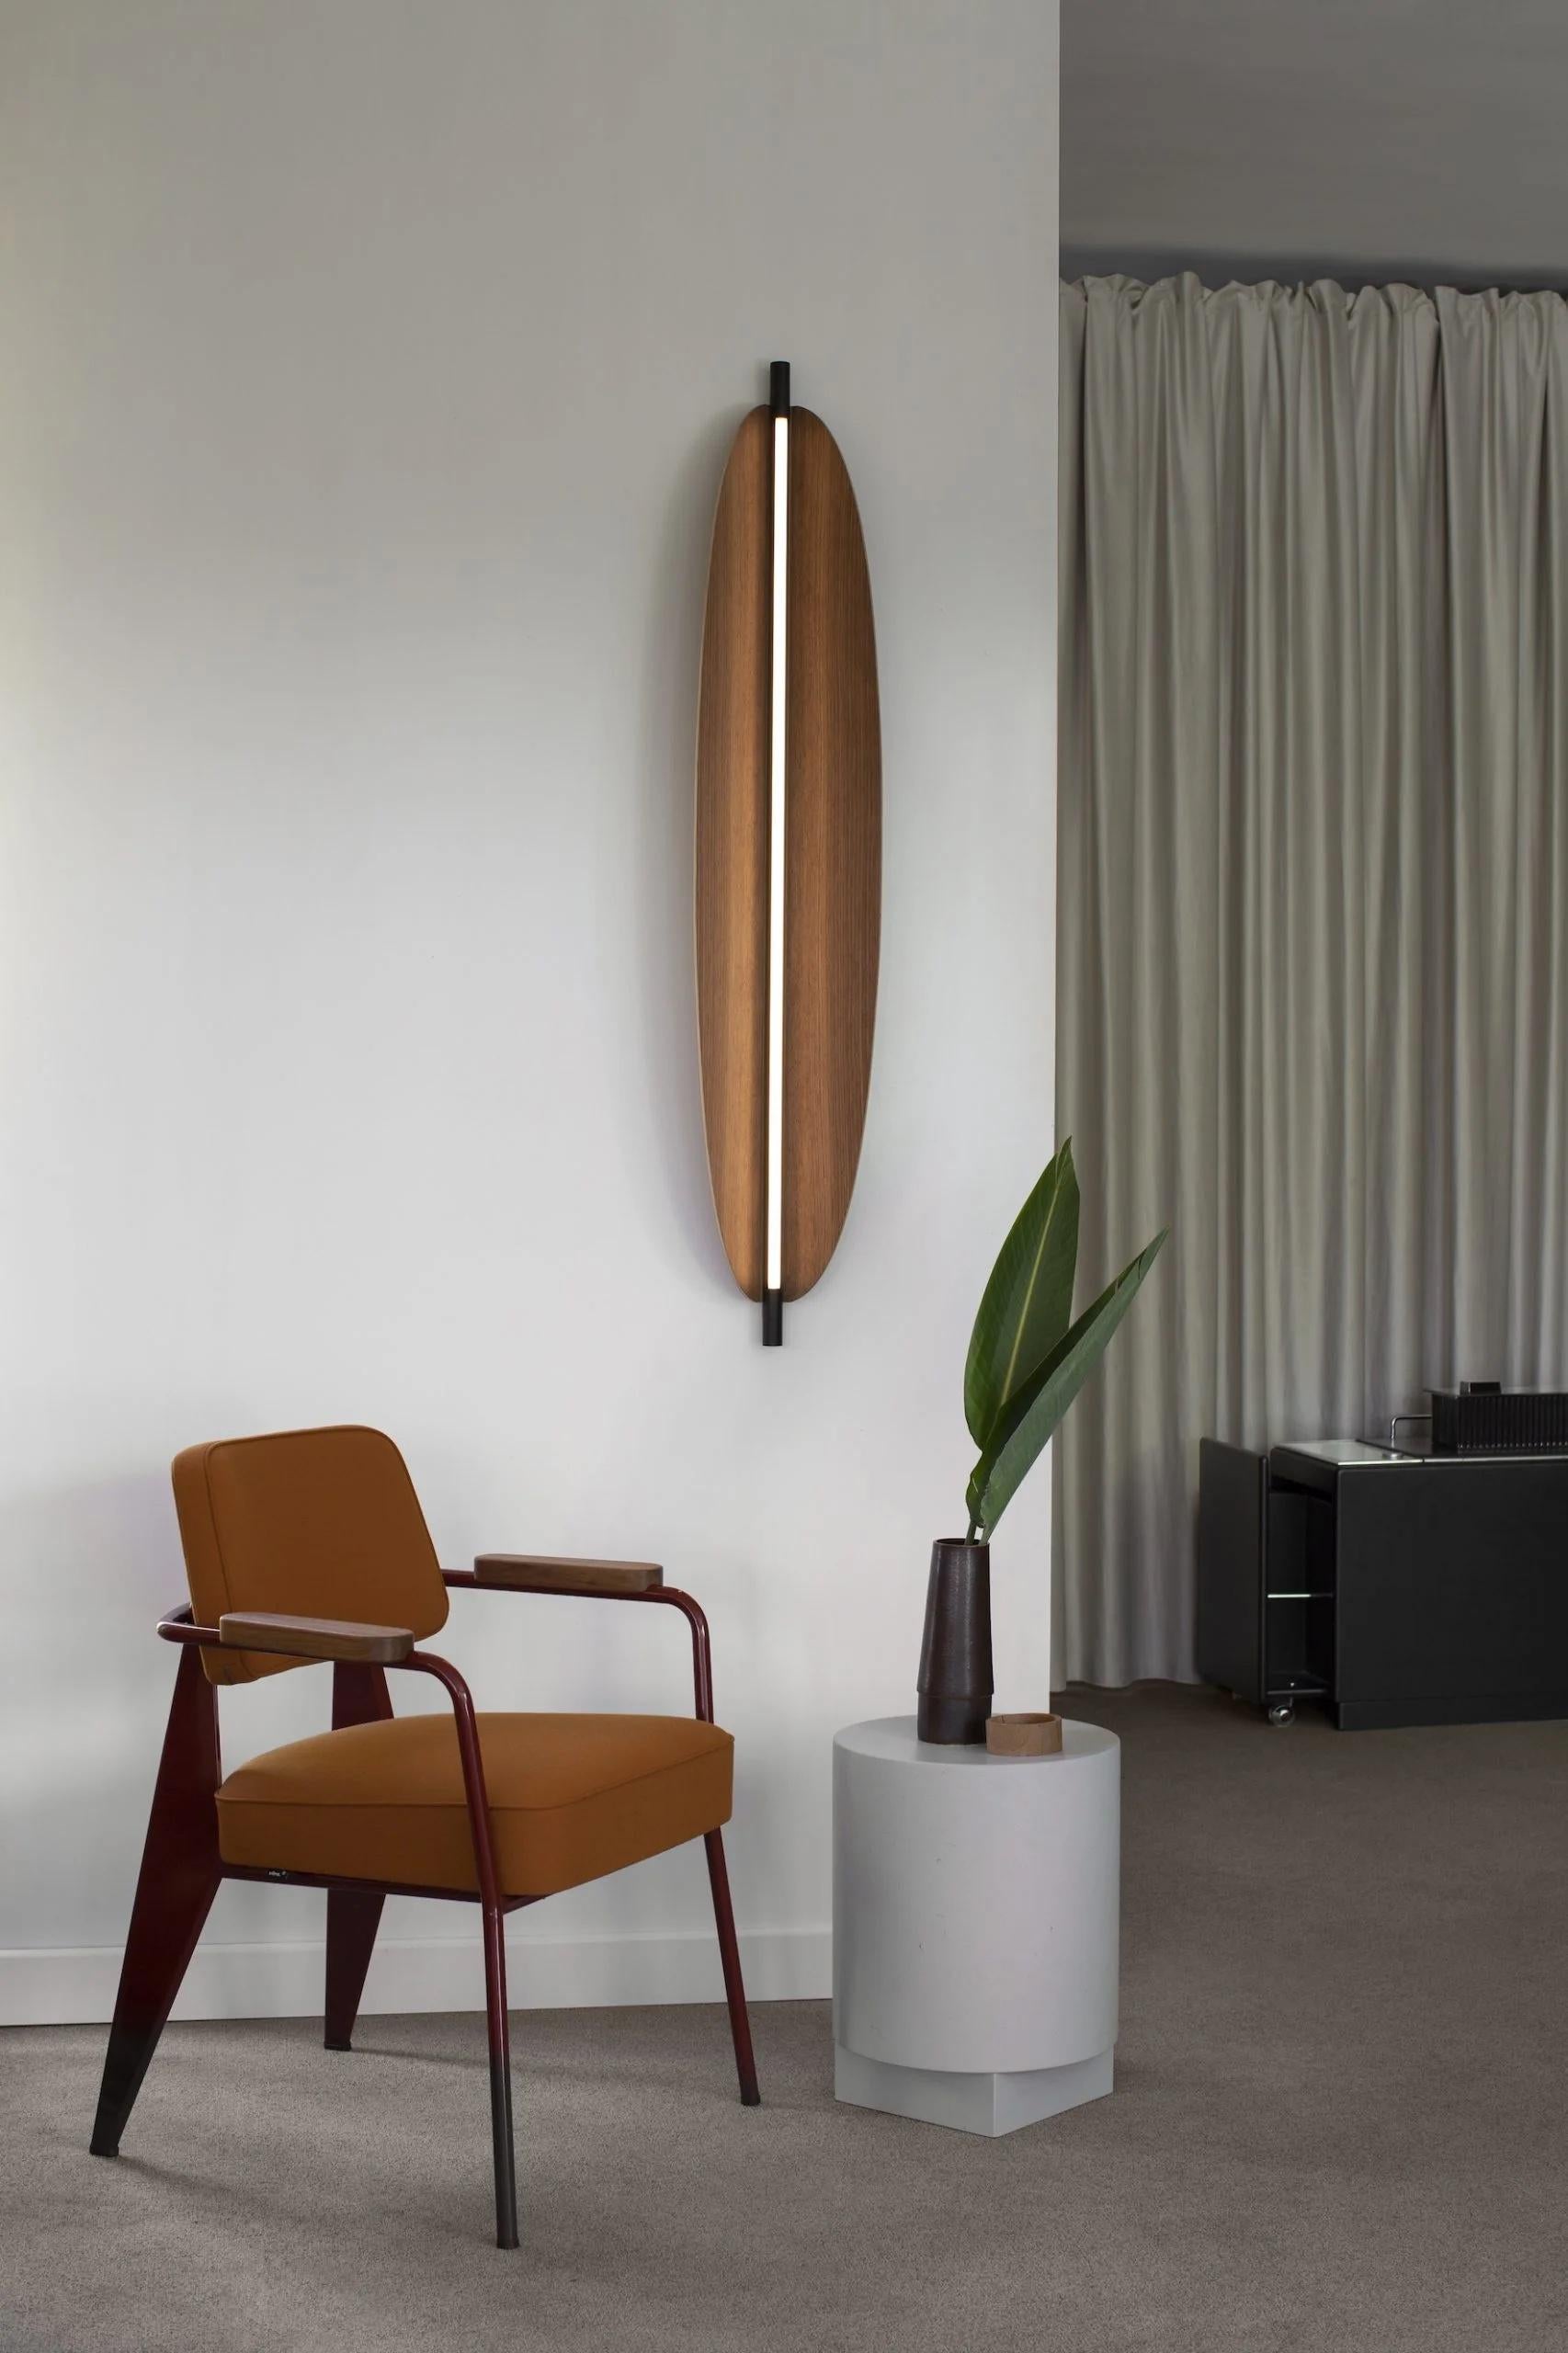 Thula 562.43 by Frederica Biasi x Tooy
Wall lamp
Compliant with USA electric system

Model shown: 
- hardware Sand black 
- details Sand black
- shade Canaletto walnut

Materials: aluminum, metal, leather, wood

The Thula wall lamps are based on a